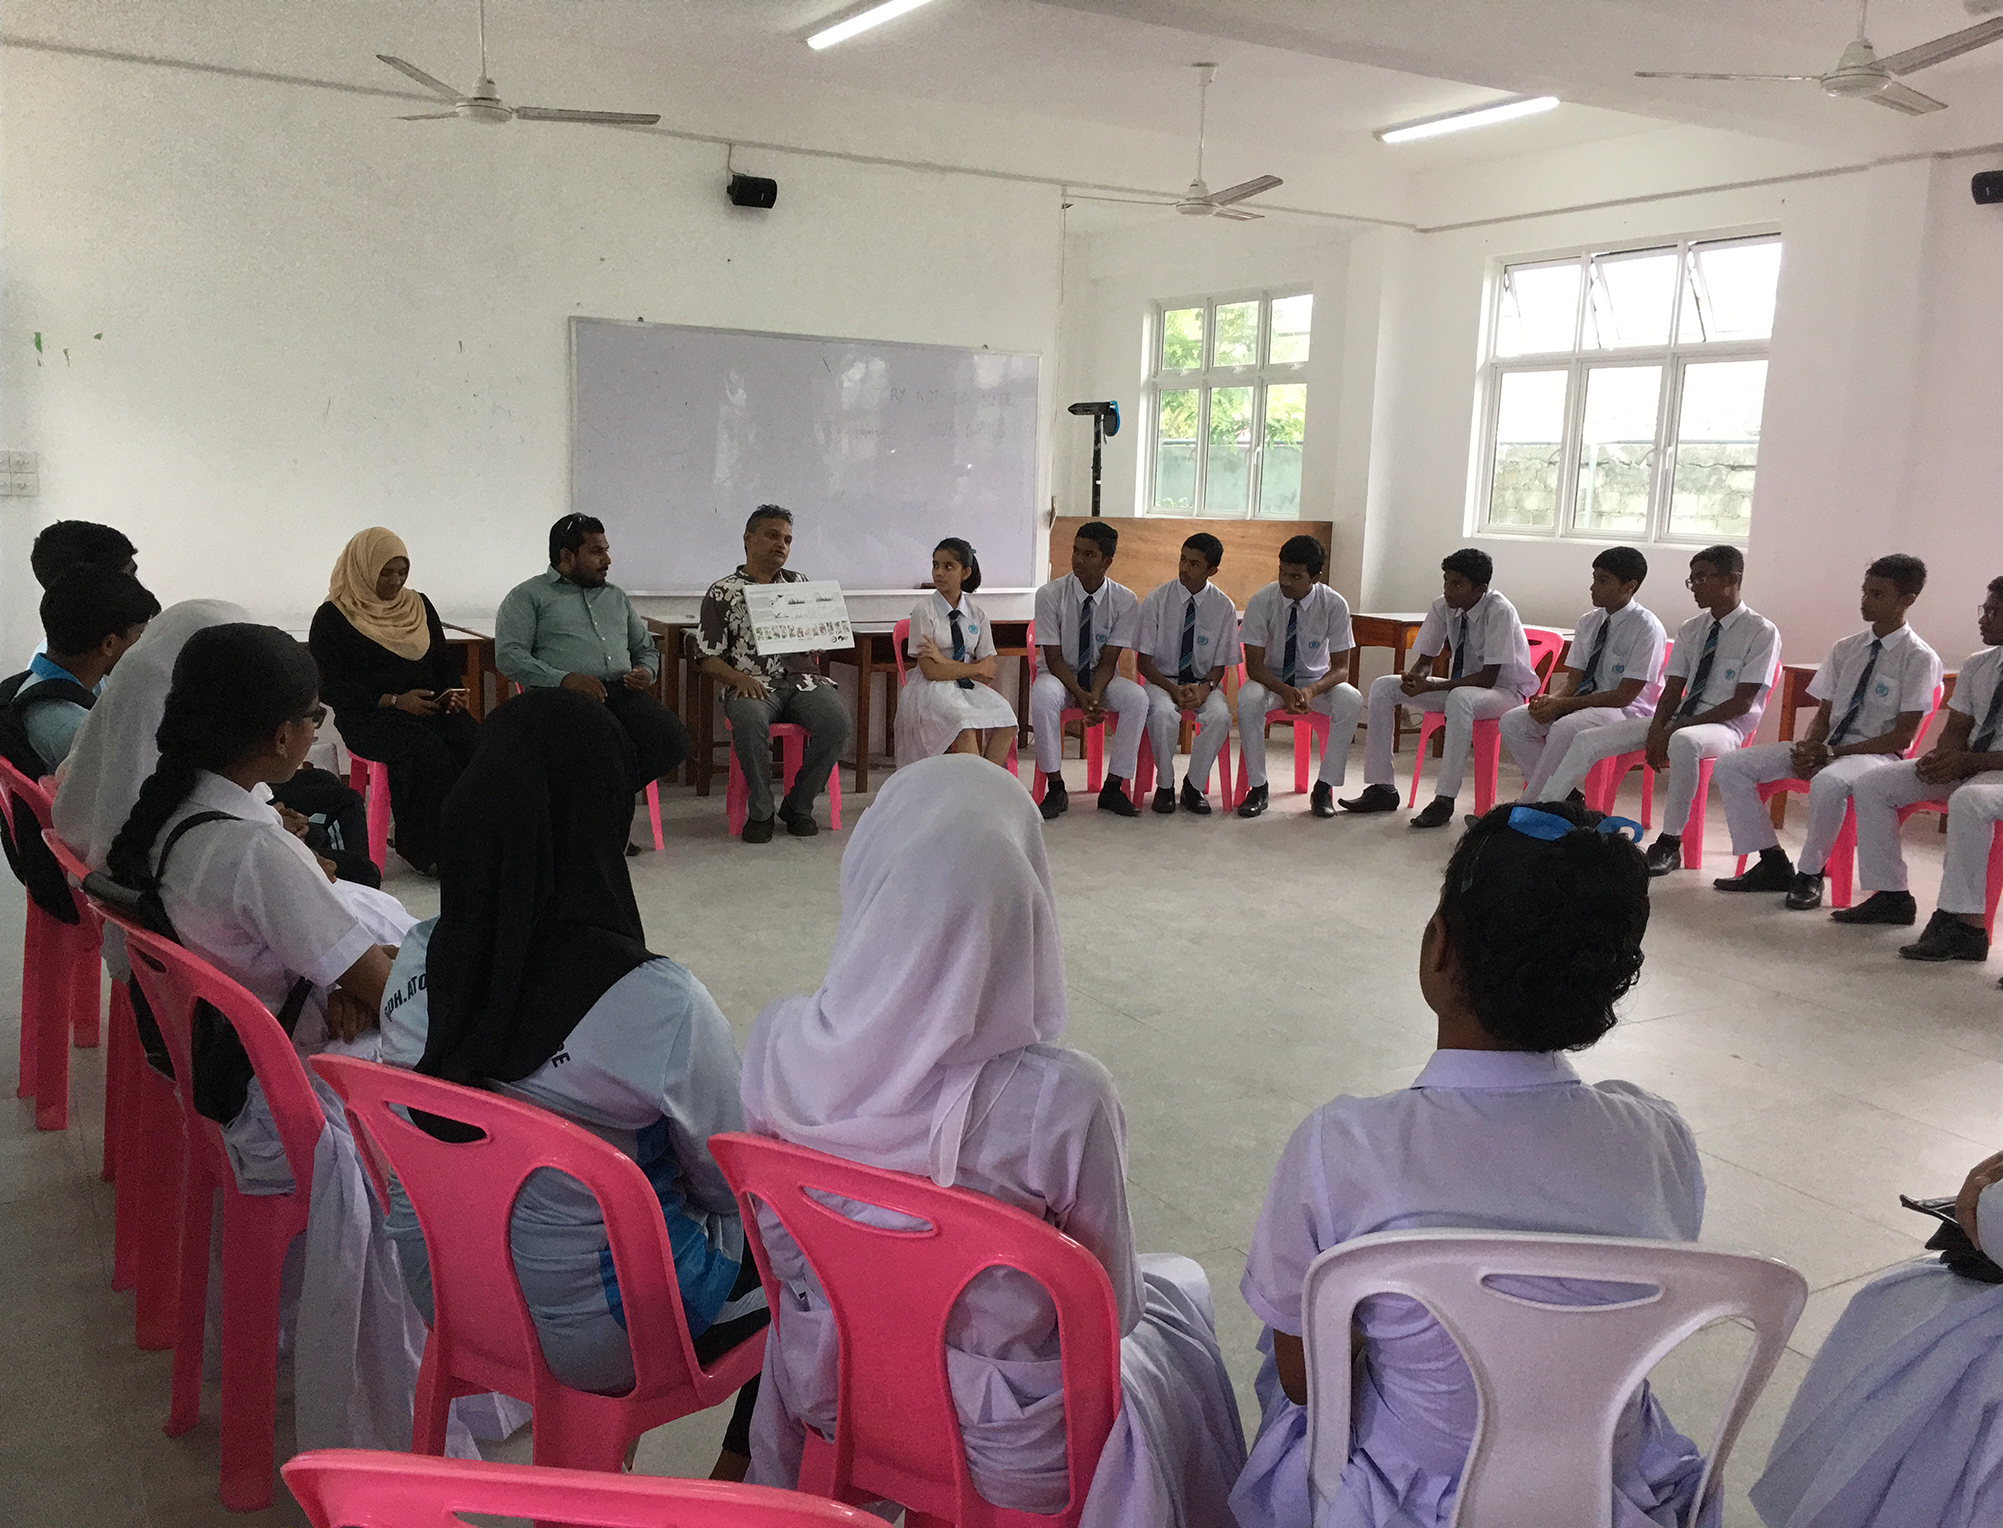 Aishath Luthfee, Shifaz Mohamed, Lareef Zubair and the School Prefects at the Discussion